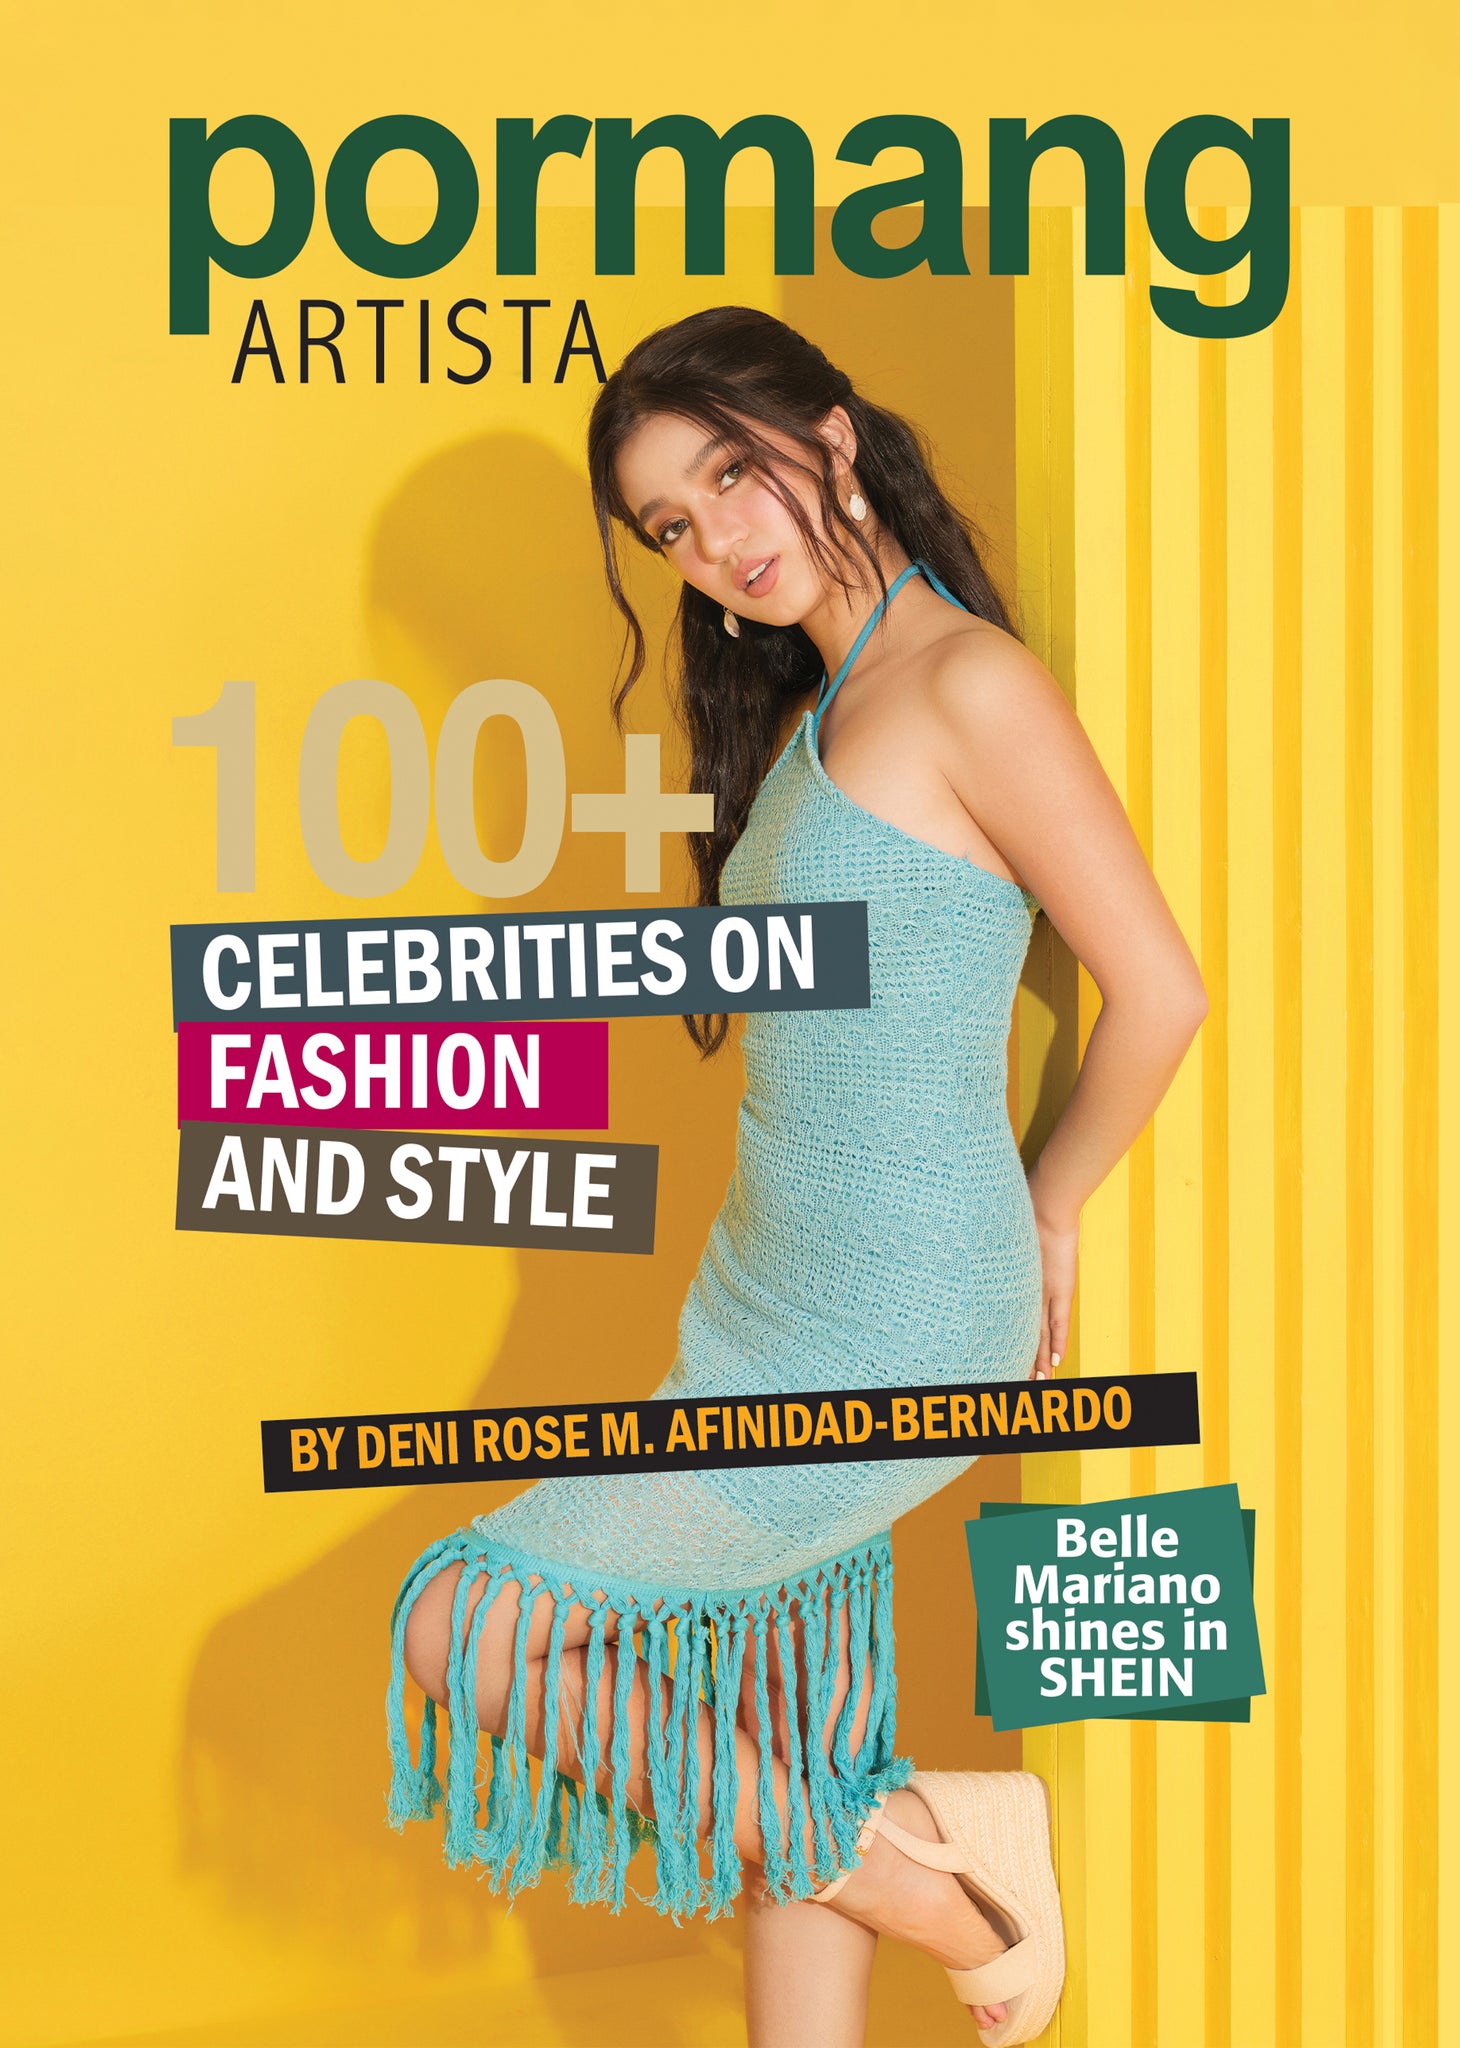 Sanctum - Pormang Artista: 100+ Celebrities on Fashion and Style